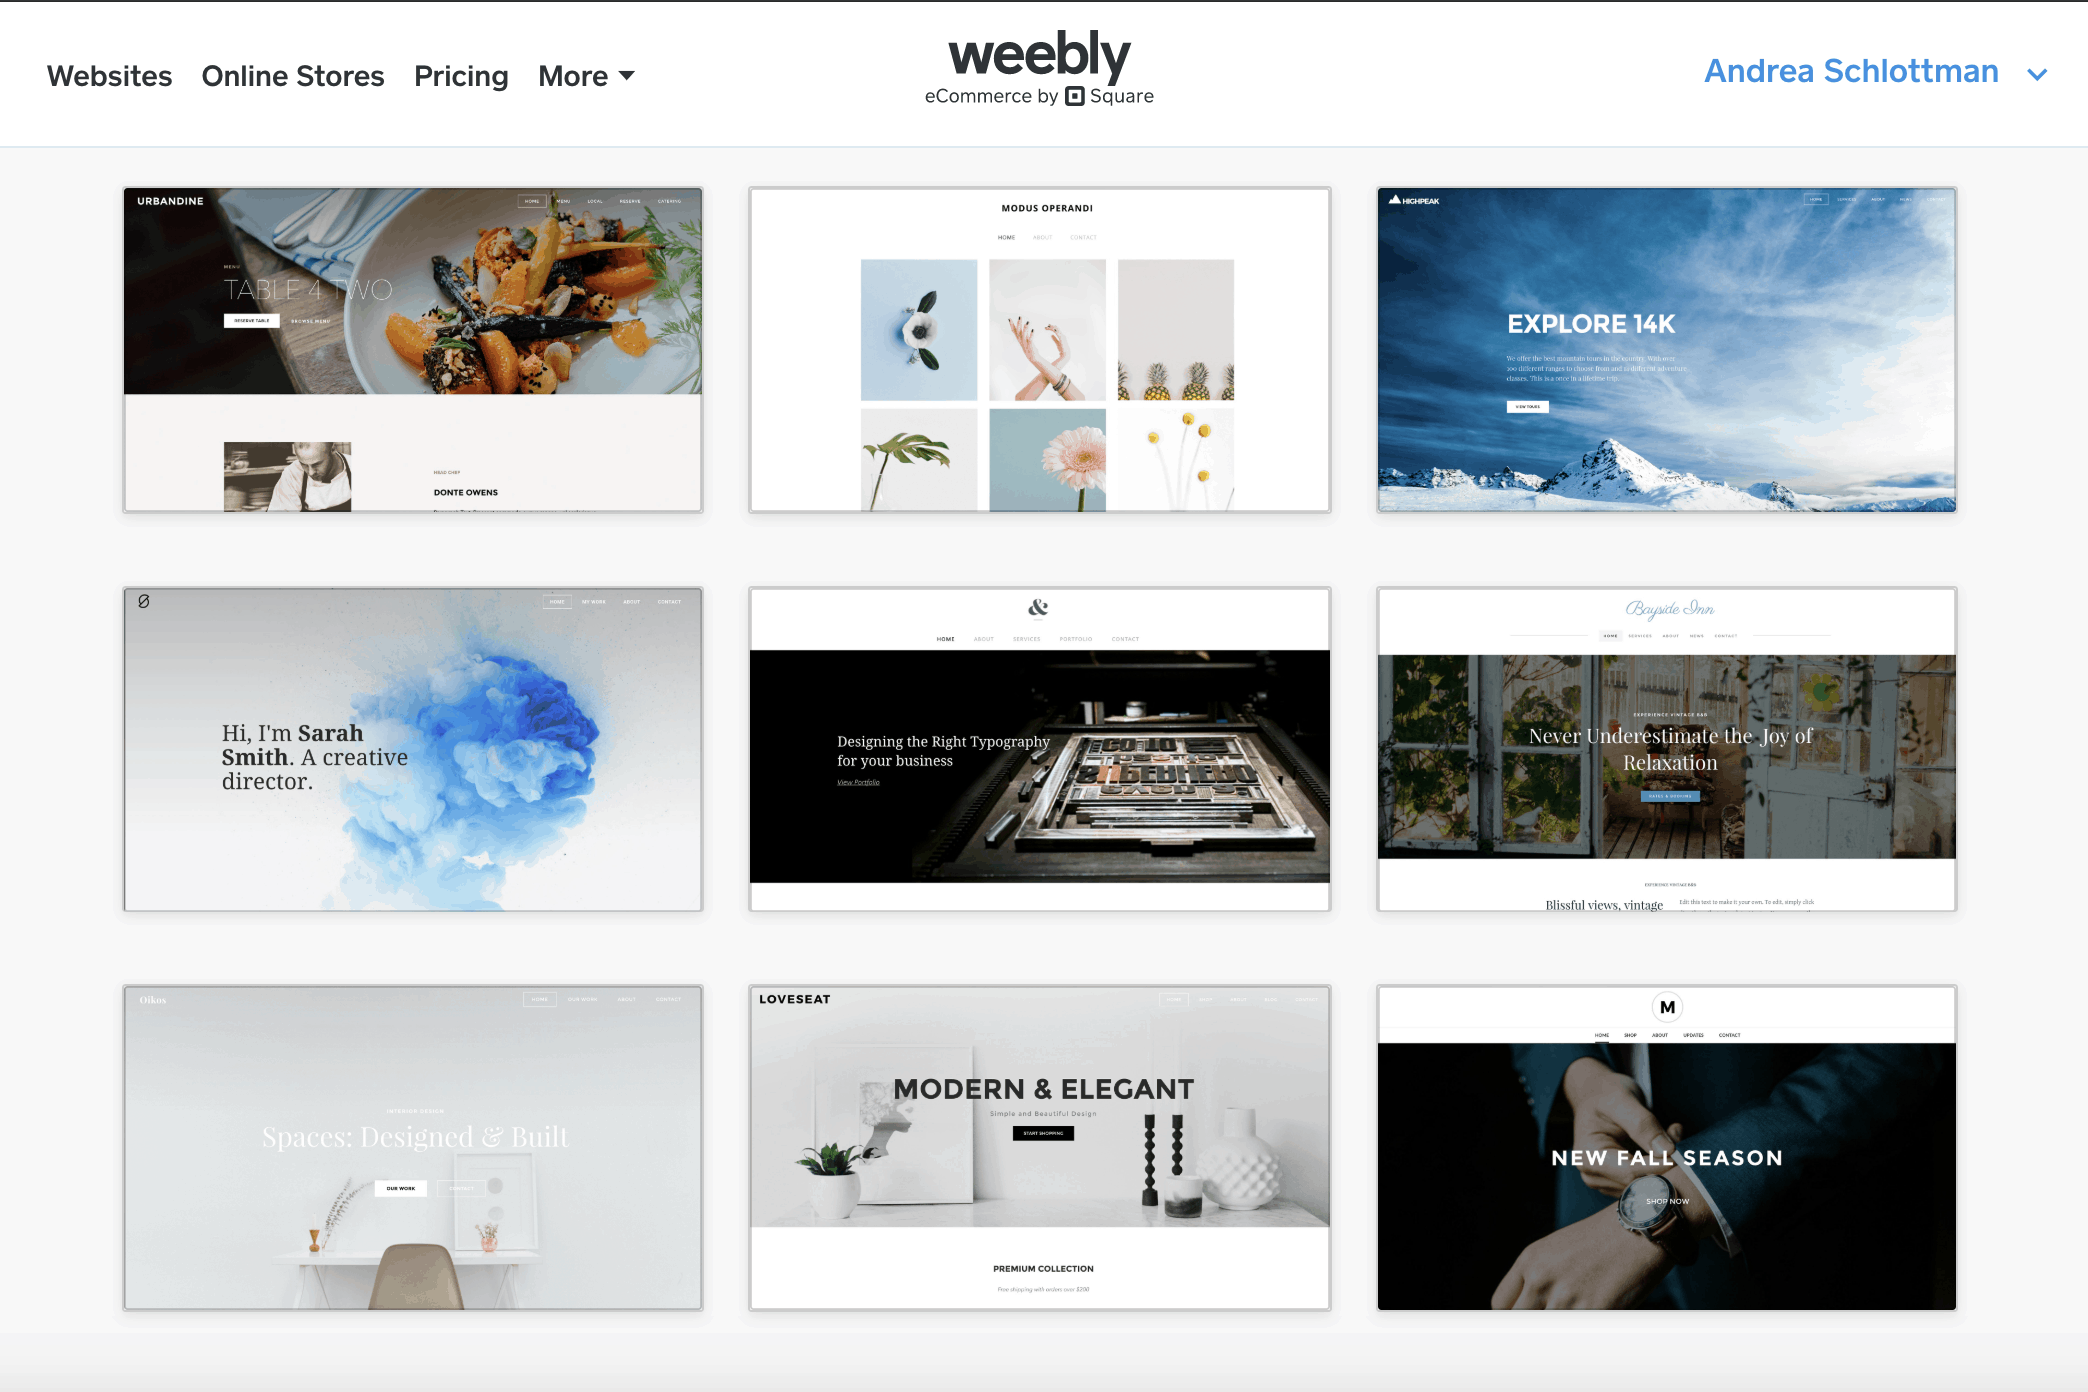 Weebly templates